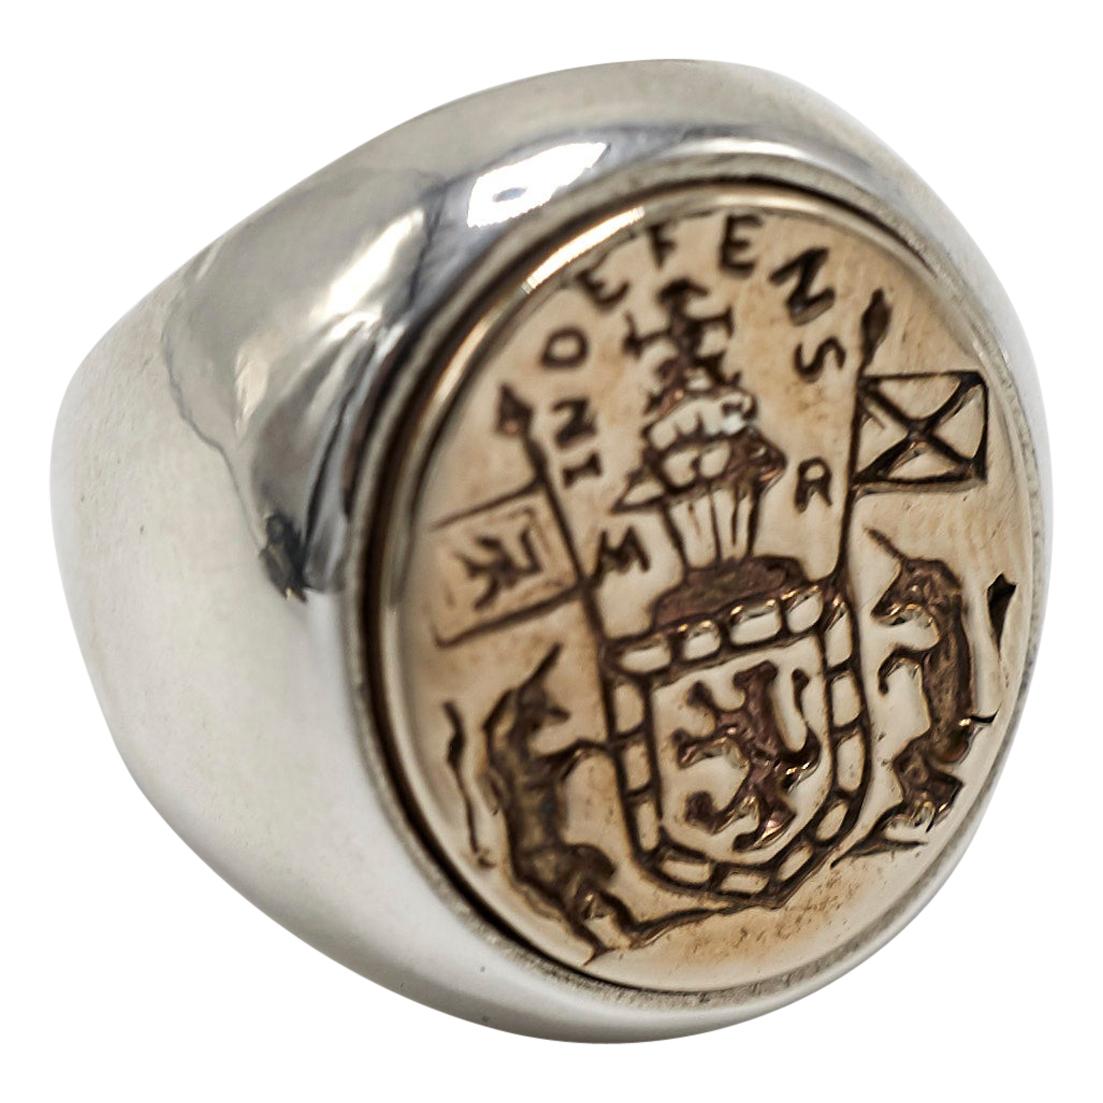 Crest Signet Ring 14k White Gold 14k Yellow Gold Unisex J Dauphin

Inspired by Queen Mary of Scots ring. Gold signet-ring; engraved; shoulders ornamented with flowers and leaves. Oval bezel set with silver intaglio depicting achievement of Mary